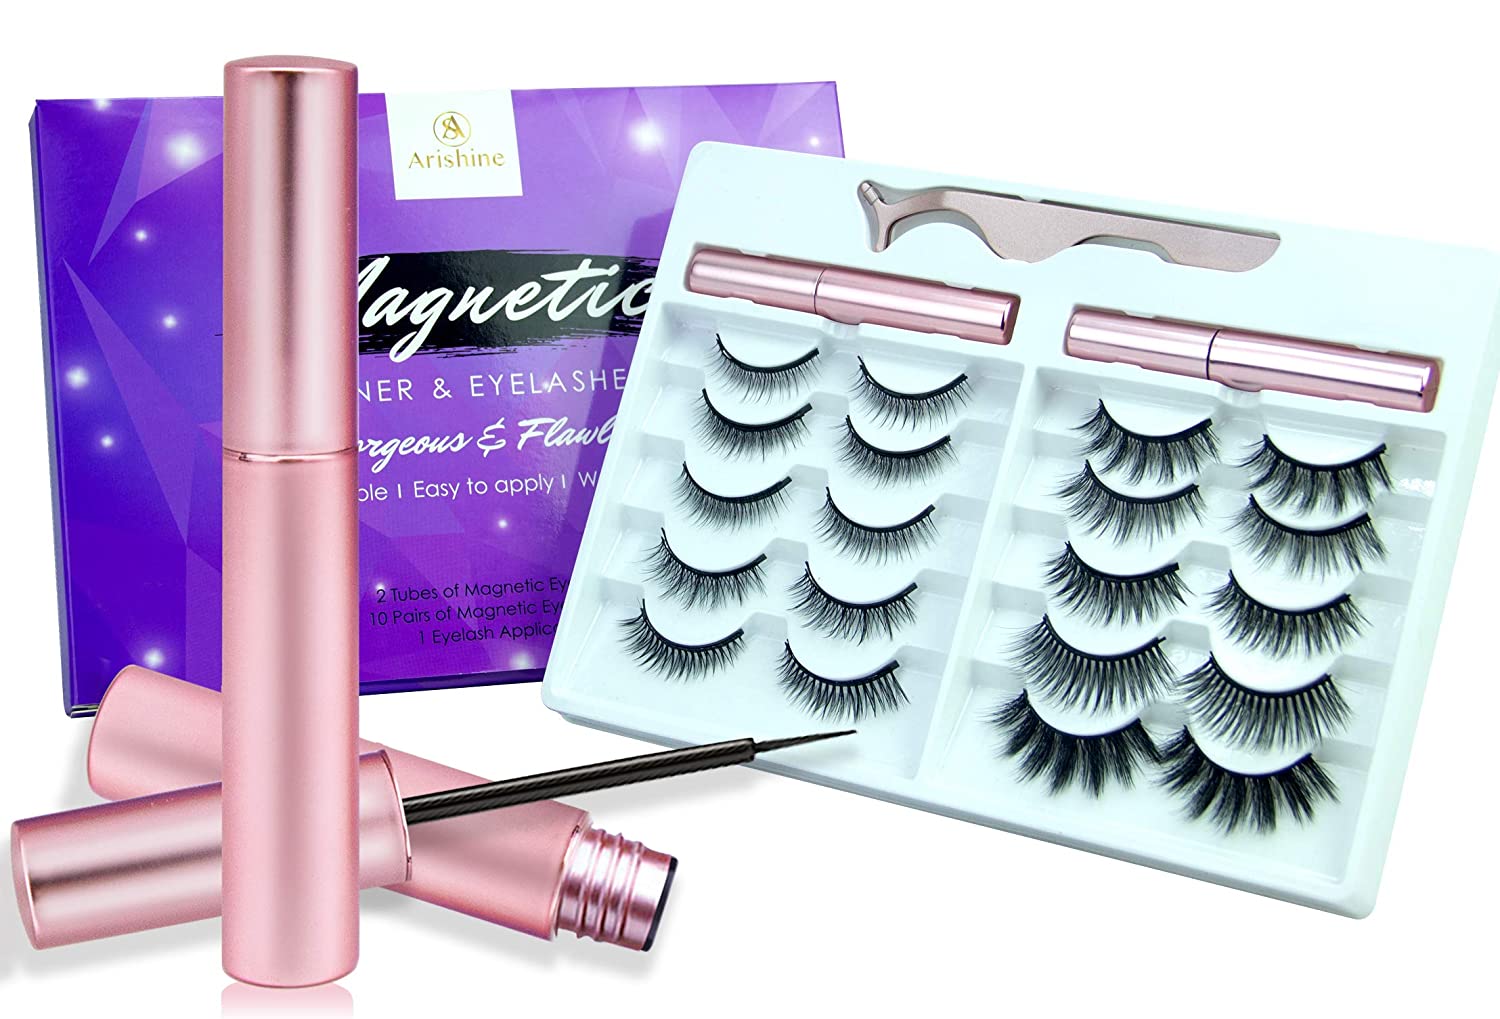 New Arishine 10 Different Pairs of Magnetic Eyelashes Kit with 2 Magnetic Eyeliners & Tweezers, Natural Look & No Glue Reusable False Lashes